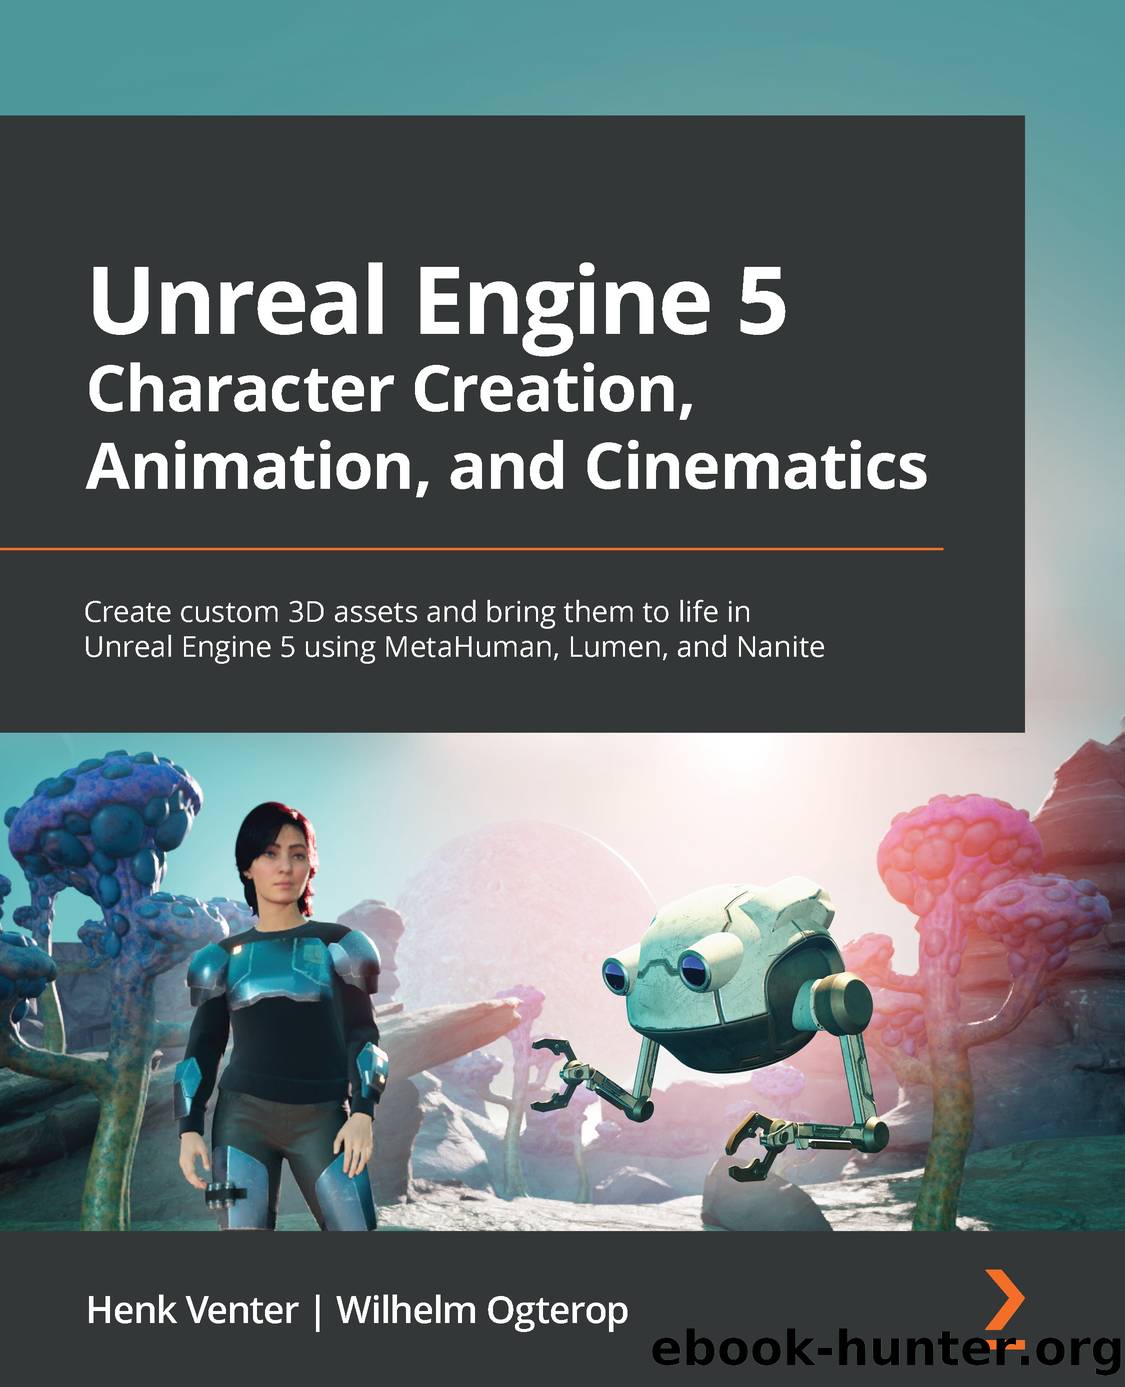 Unreal Engine 5 Character Creation, Animation, and Cinematics by Henk Venter & Wilhelm Ogterop